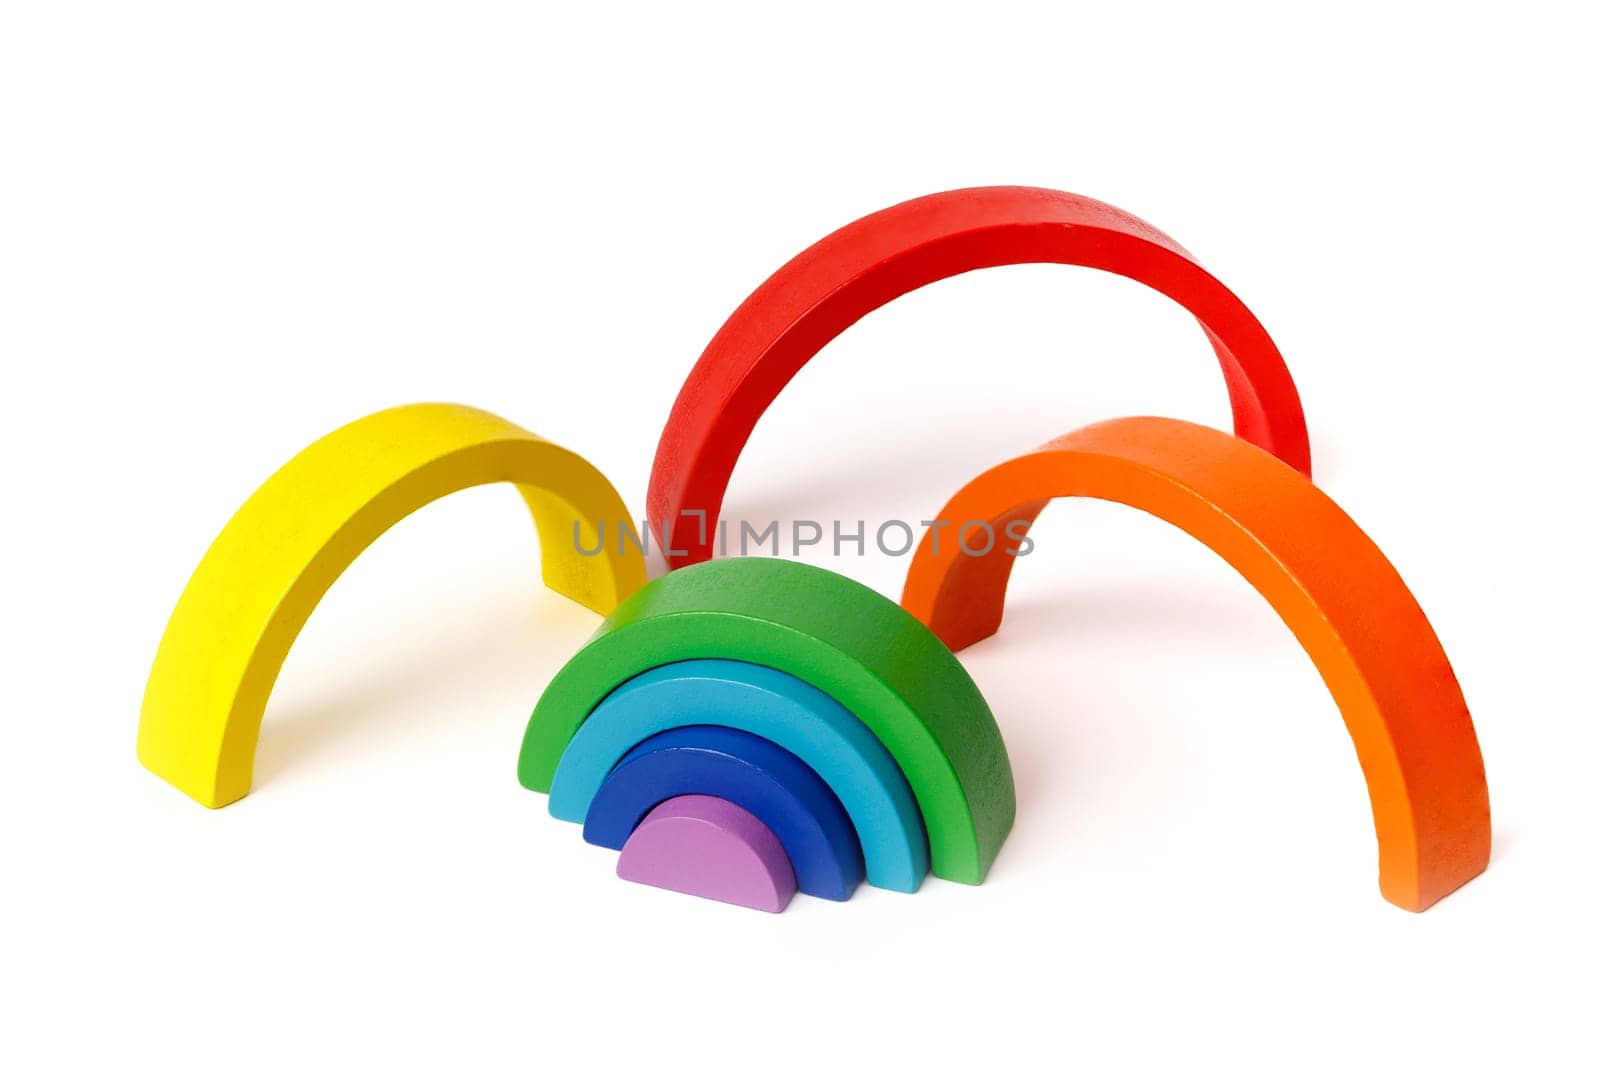 Kid's wooden educational Montessori puzzle toy set in the form of a colorful rainbow isolated on white background.